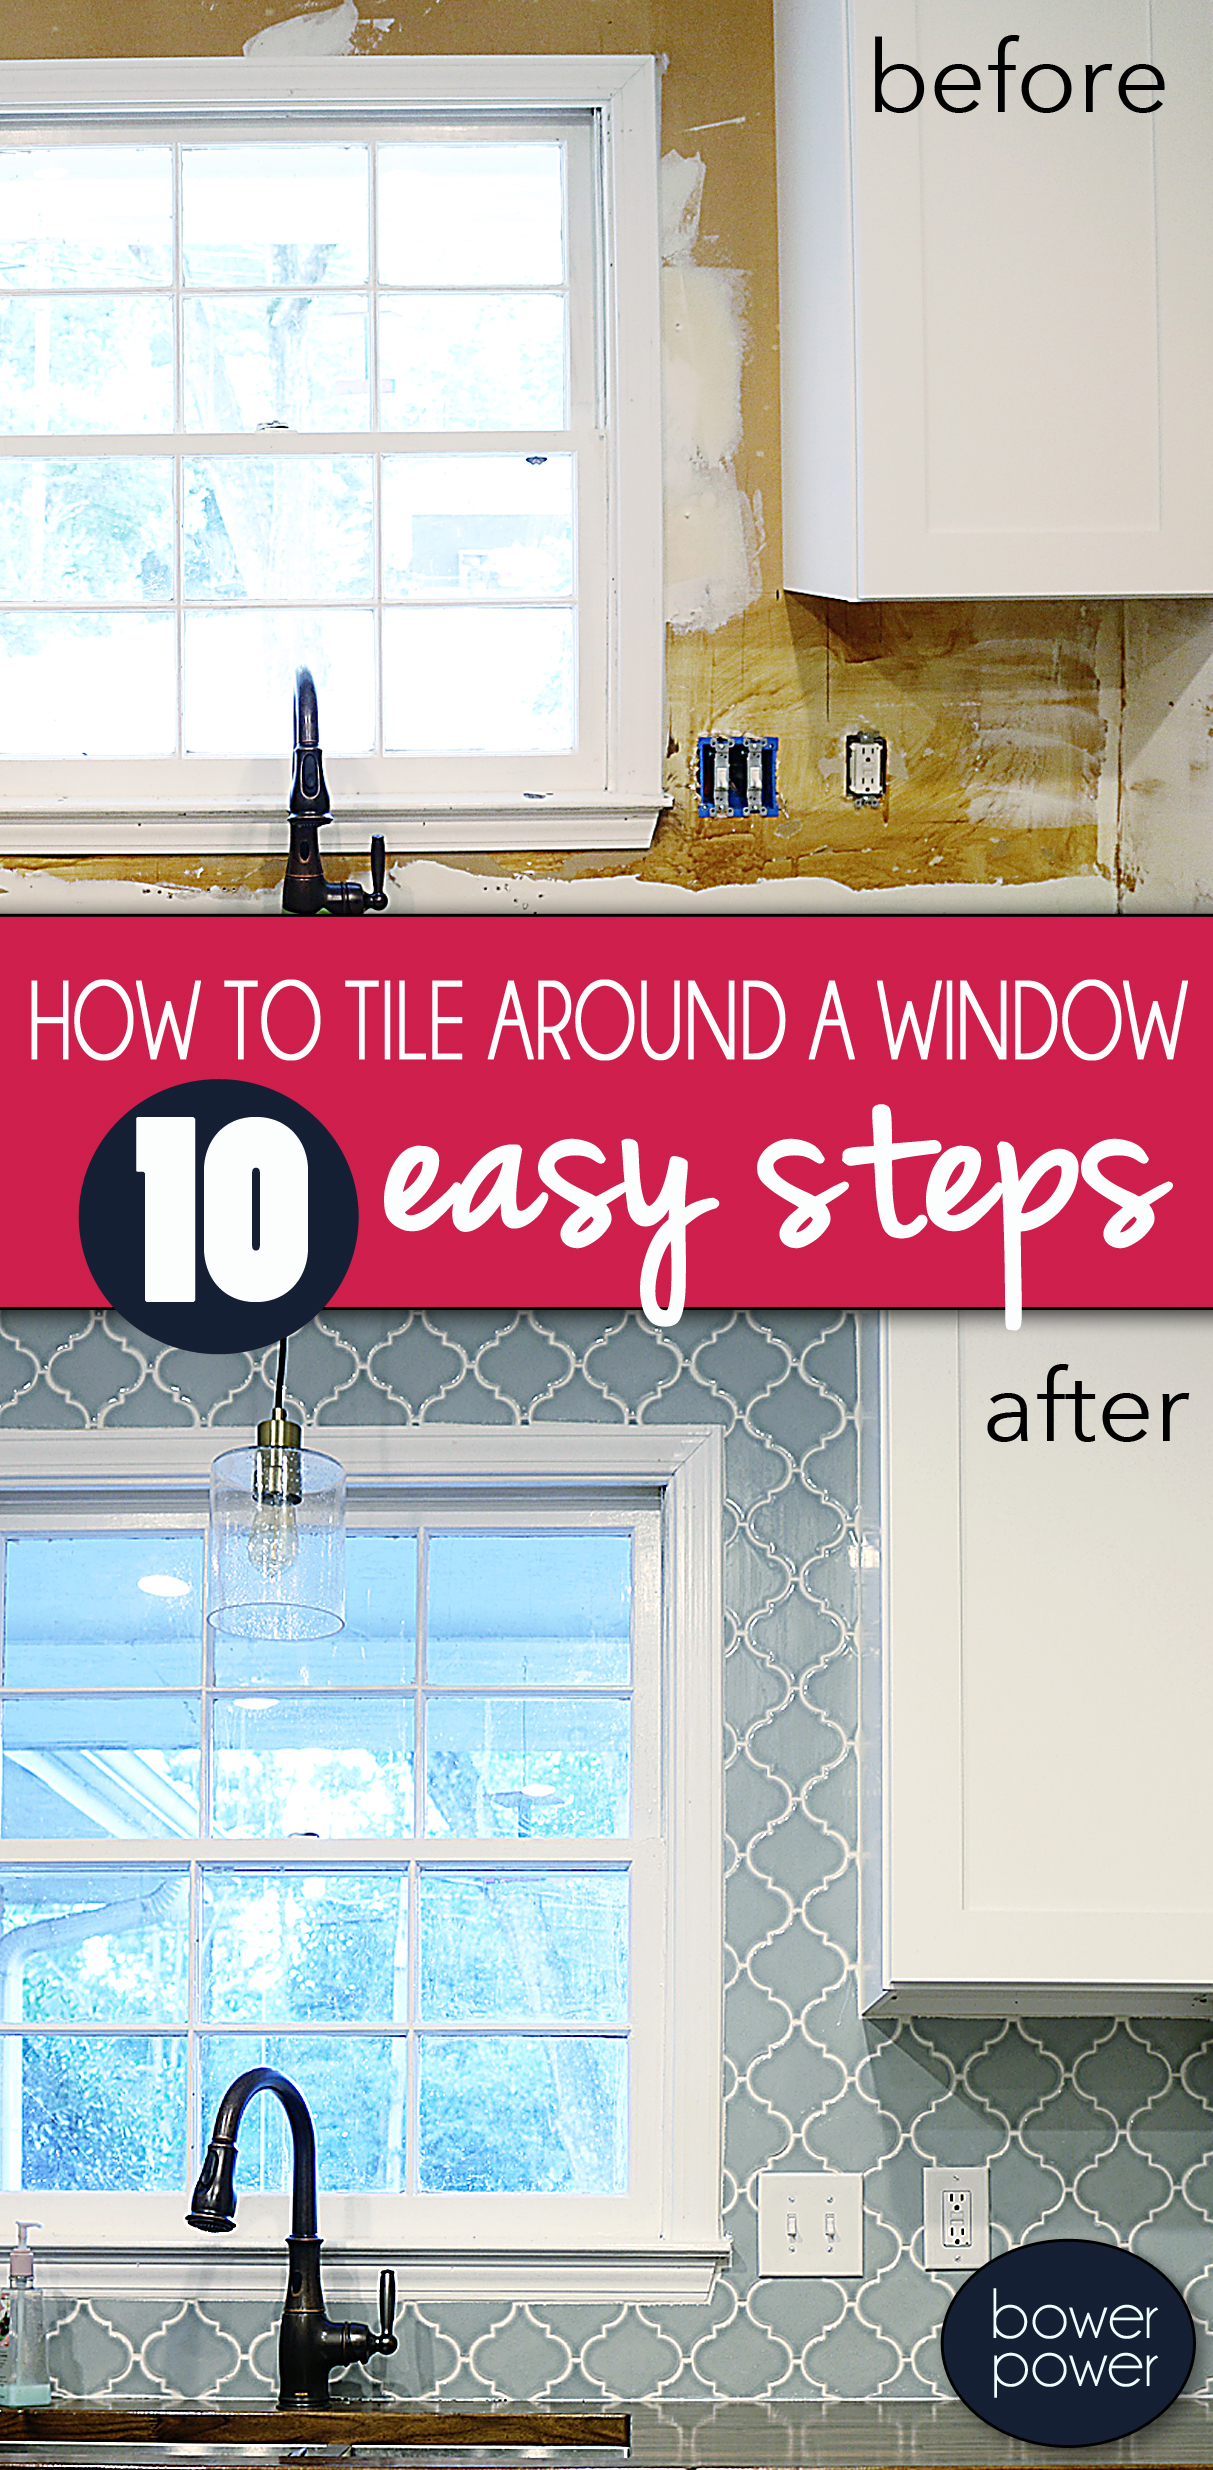 How to tile around a window - Bower Power